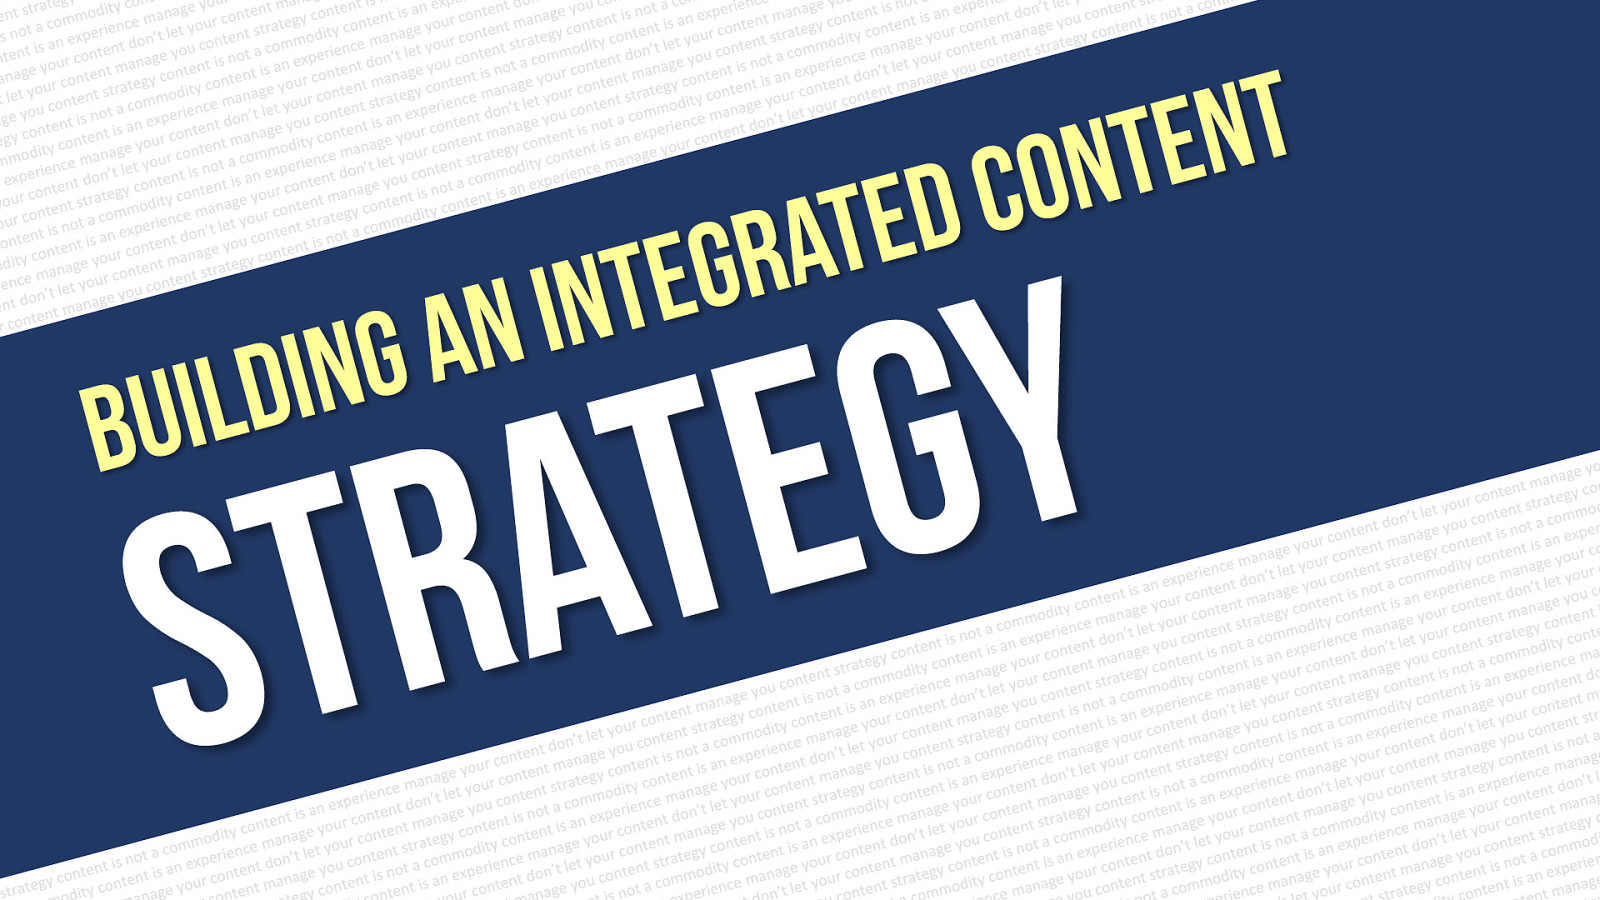 Building an Integrated Content Strategy